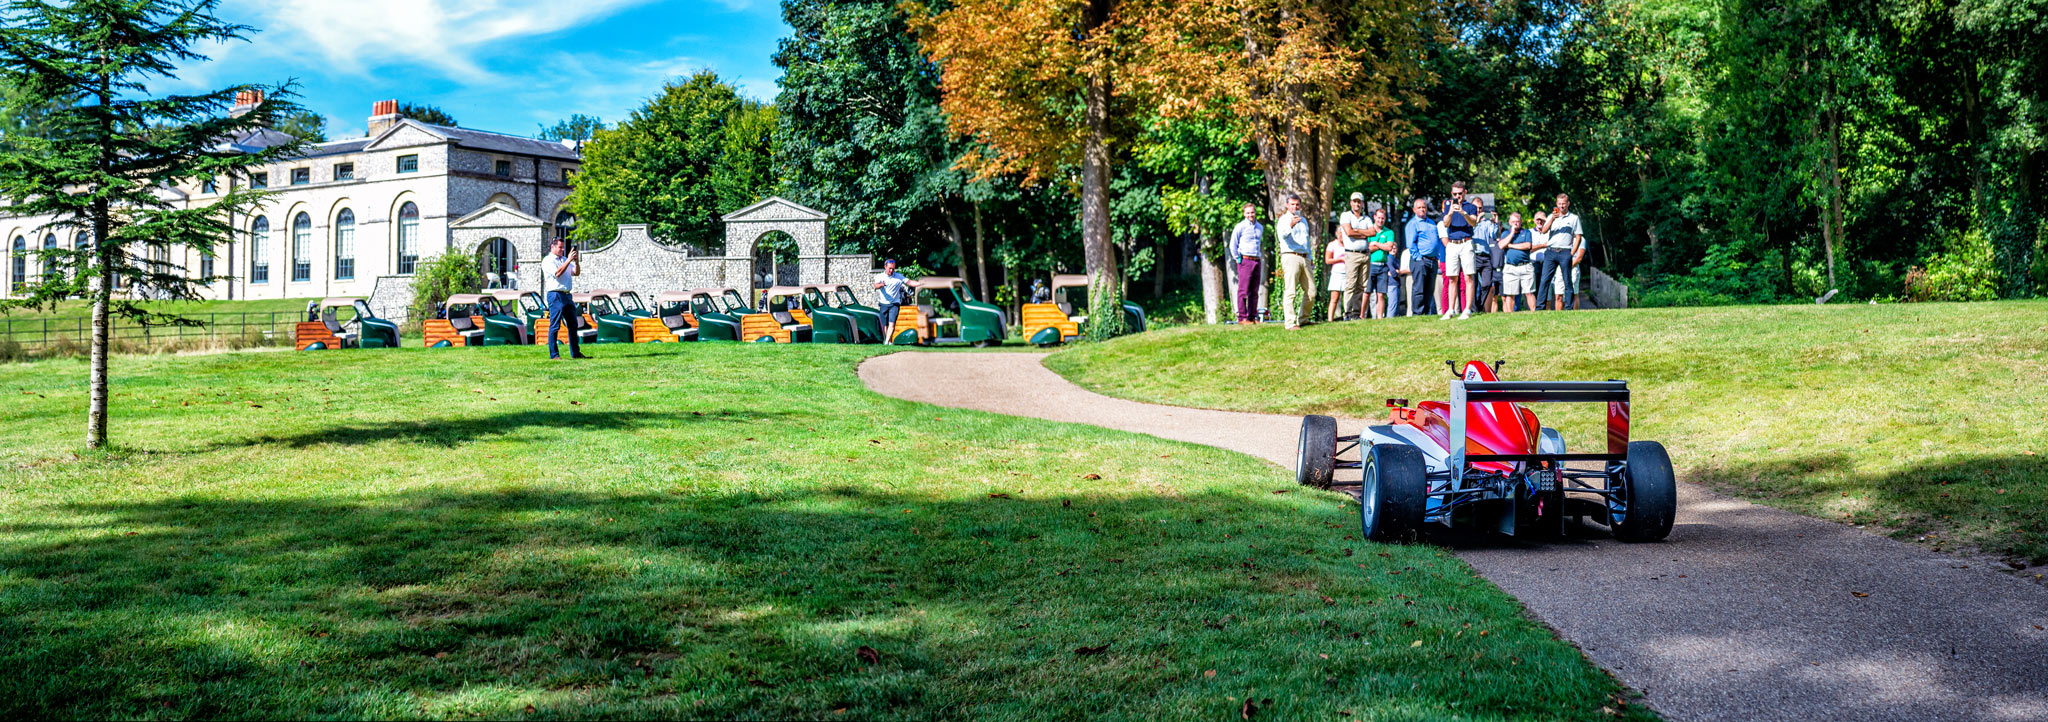 A scene of ambition captured by Wright Content, featuring a formula car driving up the fairway of a golf course. This promotional event aimed to showcase a young driver and attract potential sponsors, incorporating a day of golf for attendees. The image includes a crowd of people watching the car drive up the grass, with a majestic Manor House in the background. Wright Content specializes in capturing the spirit of athletic ambition and promotional events.